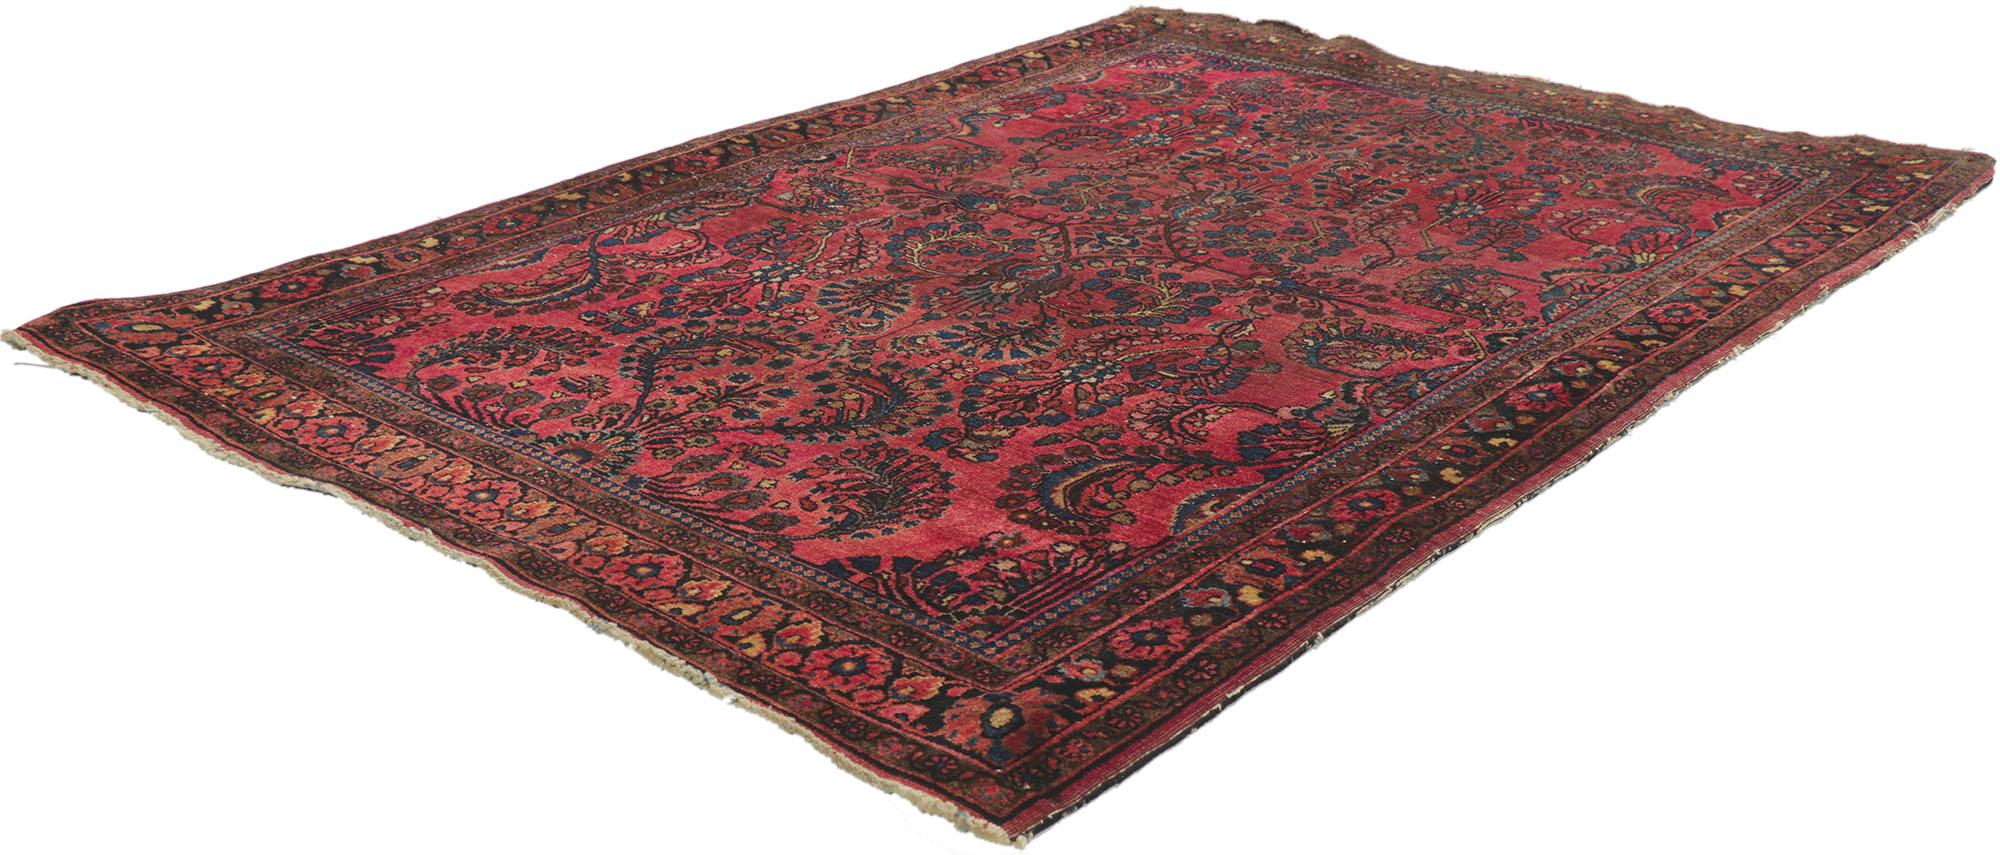 78238 Antique Persian Sarouk Rug, 03'05 x 04'09. 
Rendered in variegated shades of red, navy blue, berry, cerulean, brown, tan, and rose with other accent colors. Desirable Age Wear. Abrash. Hand-knotted wool. Made in Iran.
